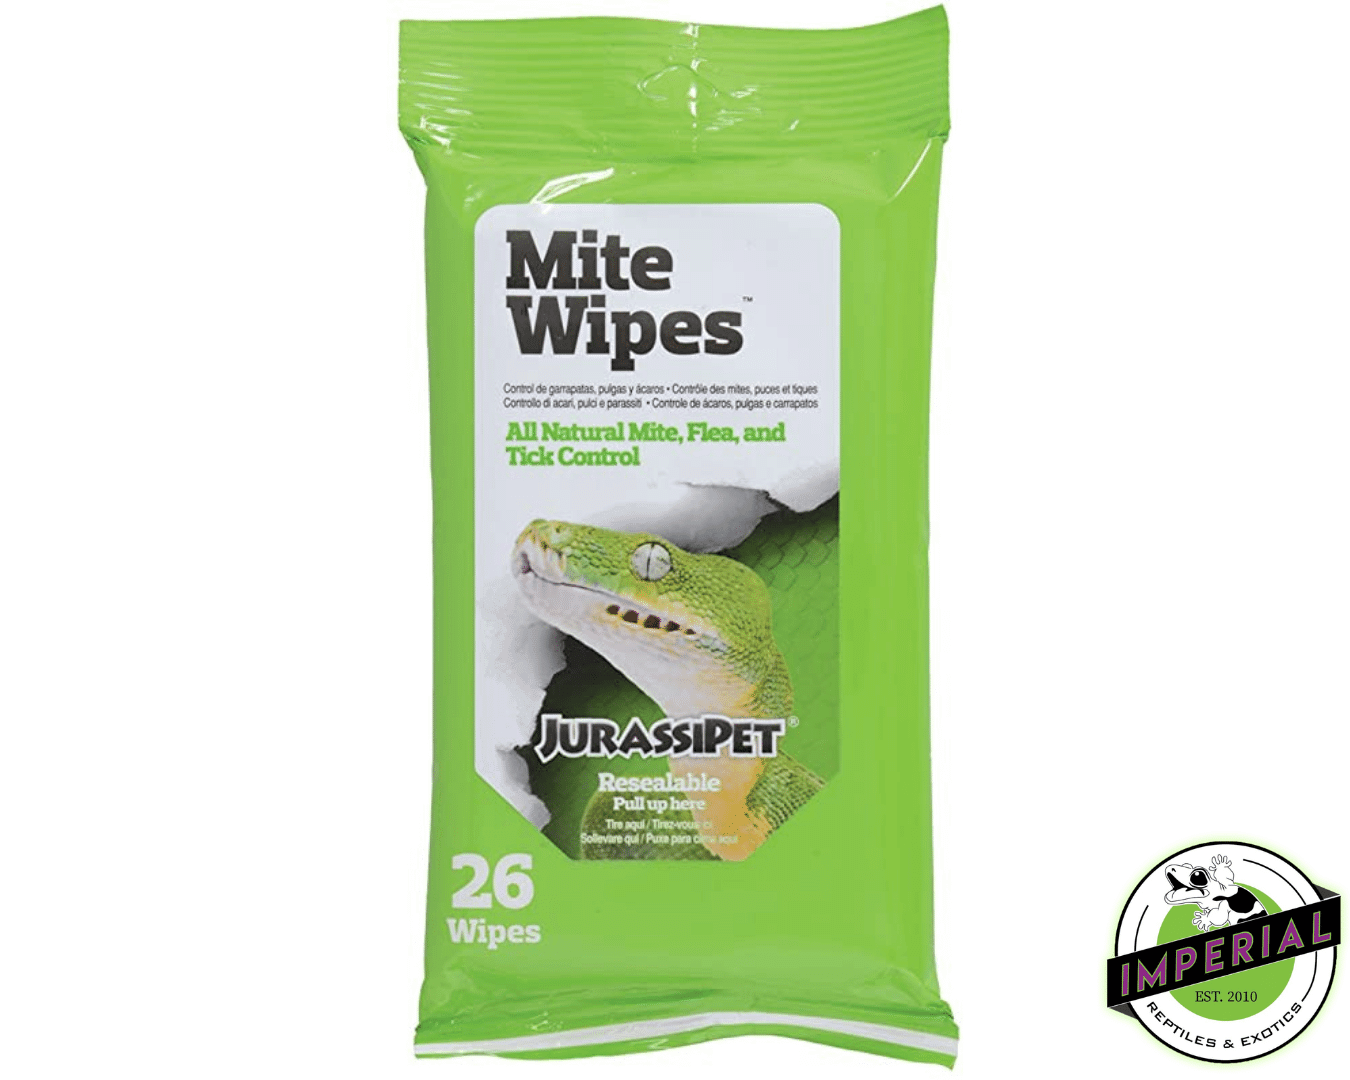 reptile mite wipes for sale online, buy cheap reptile supplies near me